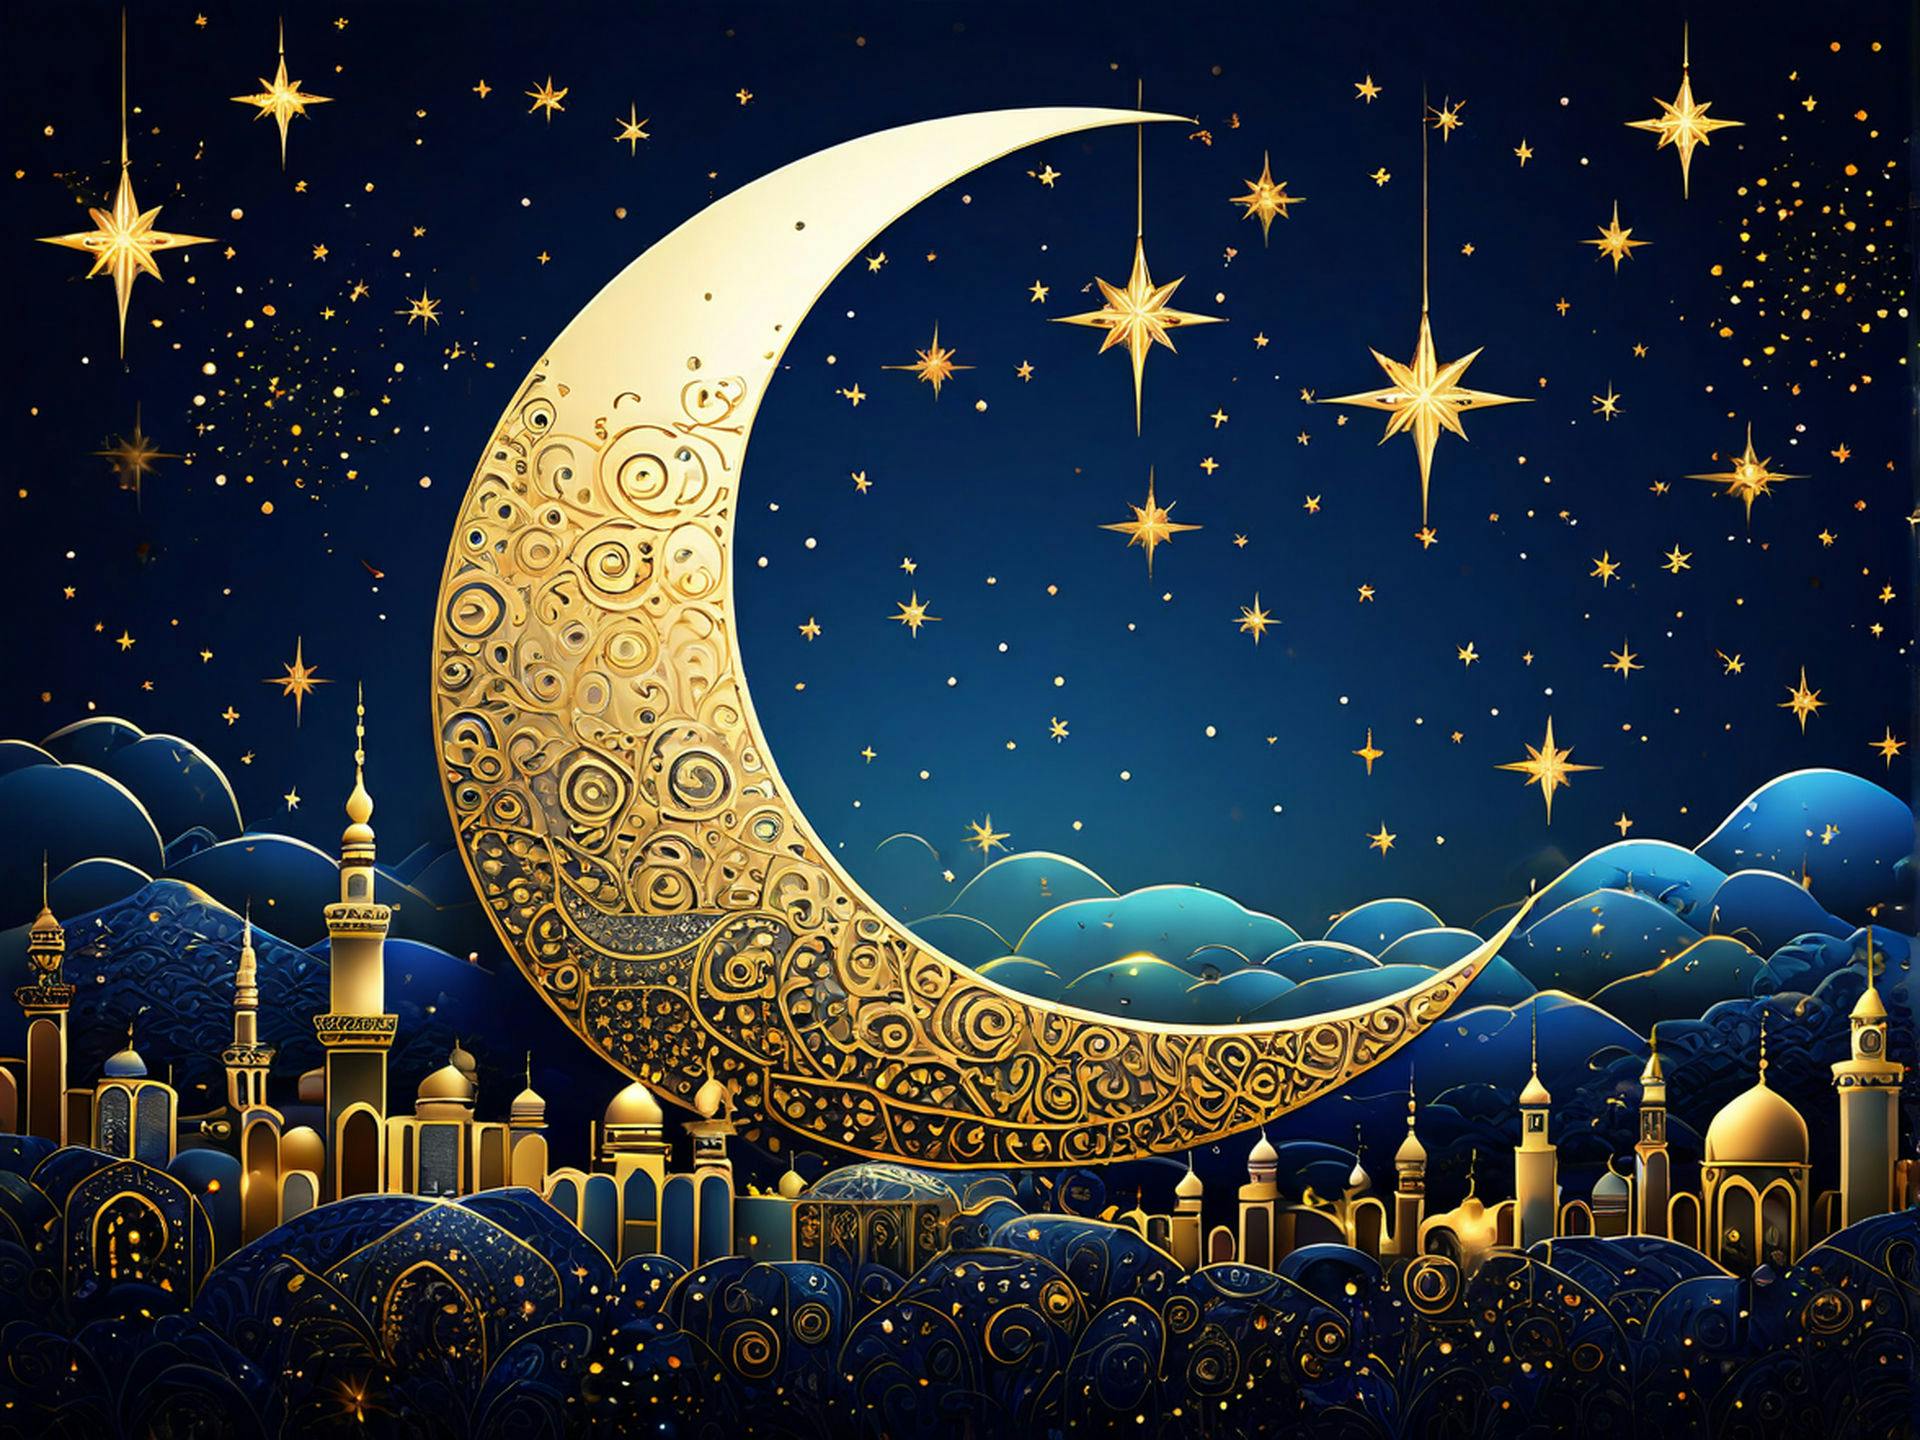 Eid al-Fitr Celebration with Crescent Moon and Starry Night